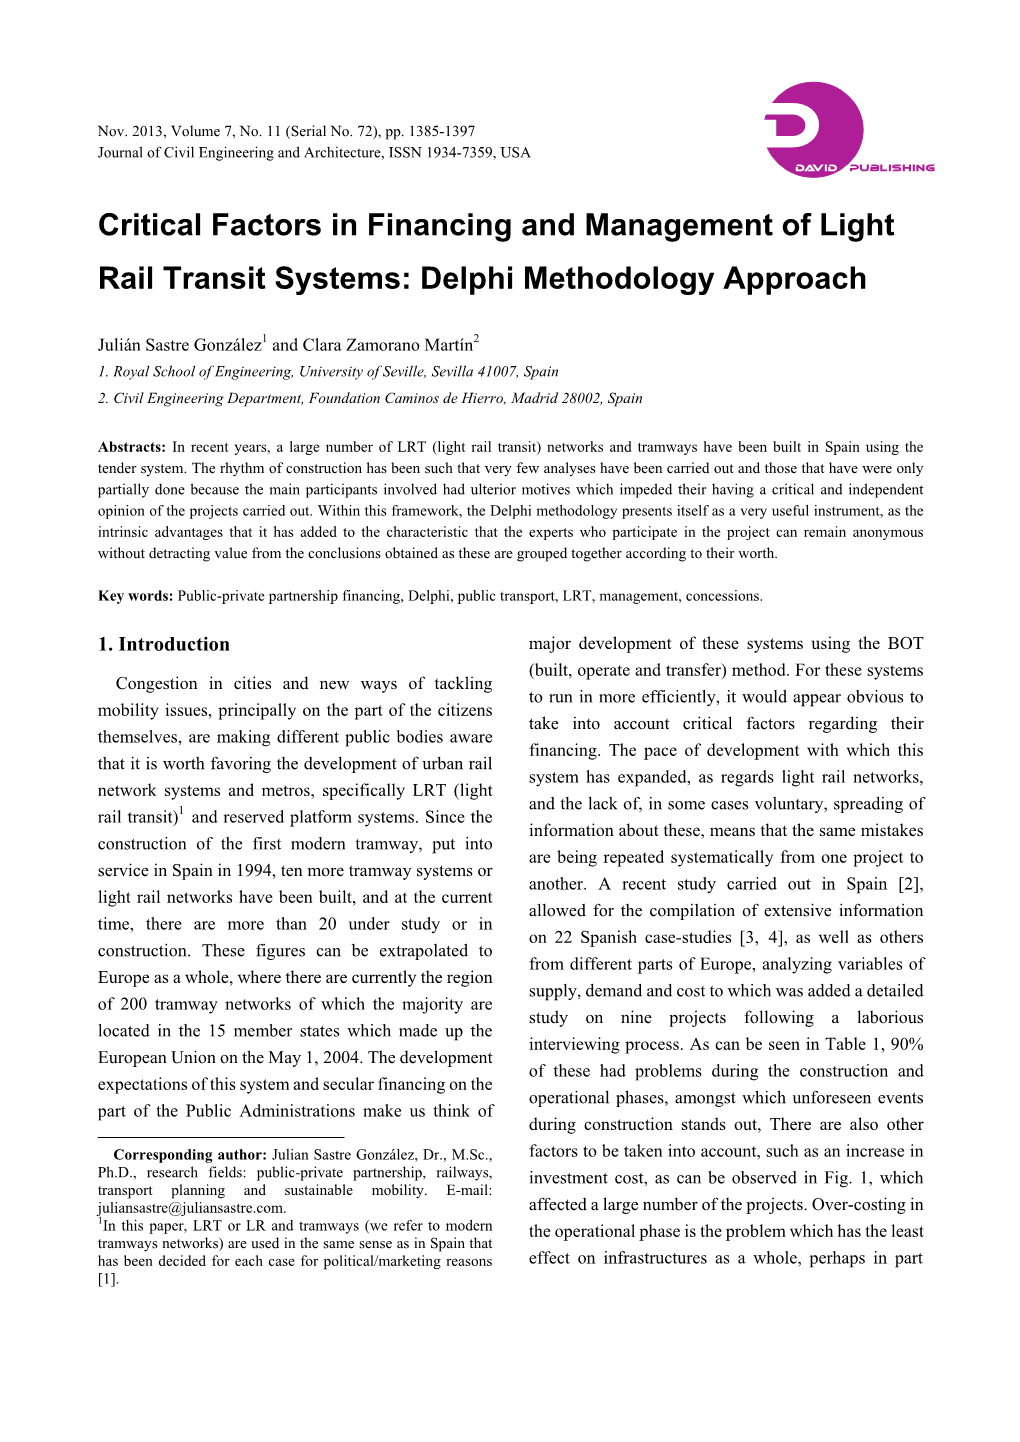 Critical Factors in Financing and Management of Light Rail Transit Systems: Delphi Methodology Approach